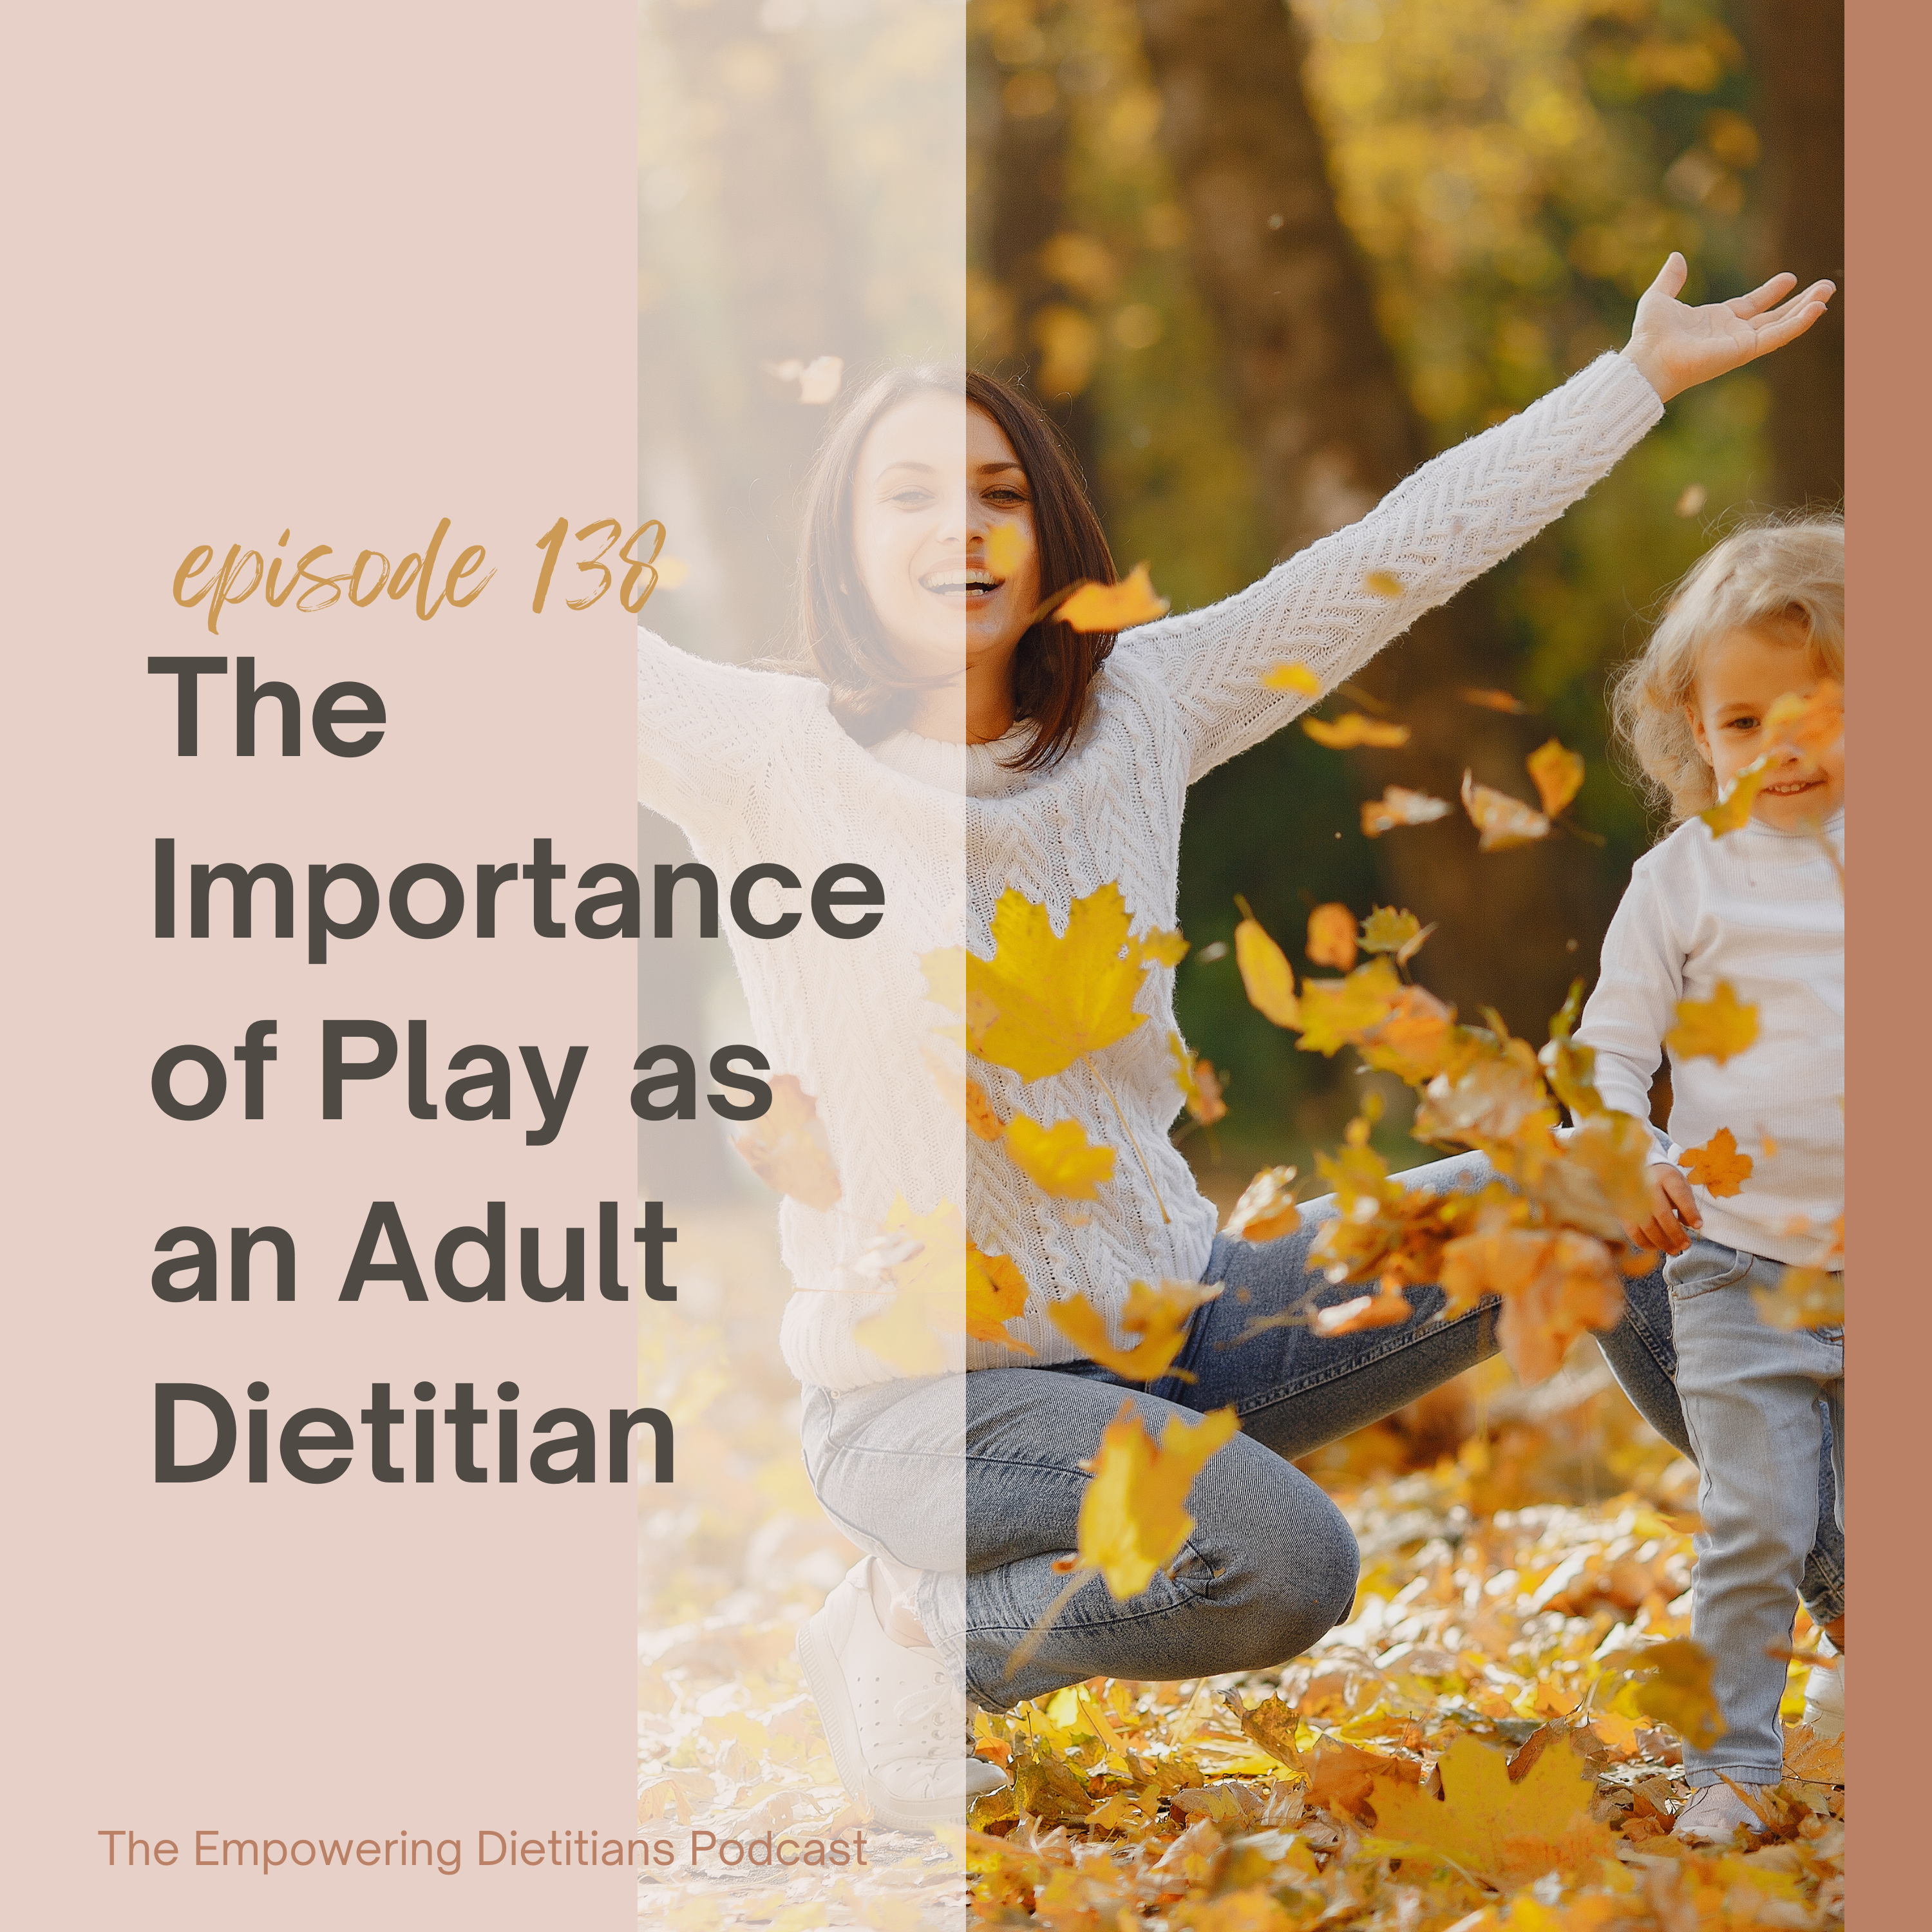 The Importance of Play as an Adult Dietitian